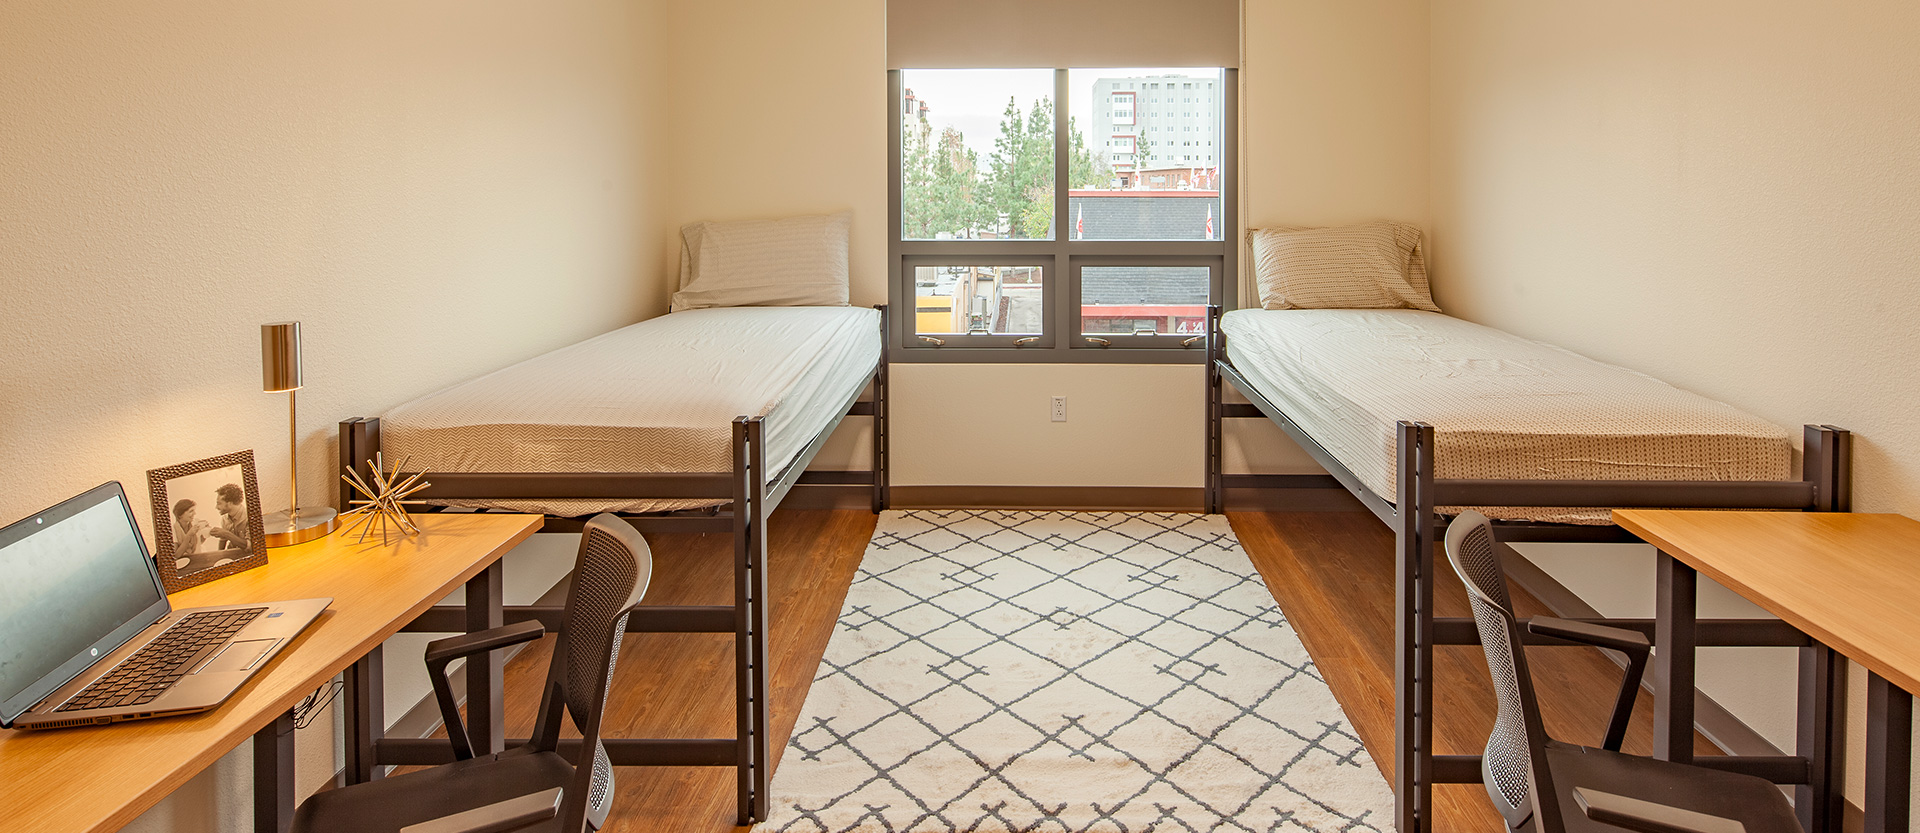 South Campus Plaza - Double Room